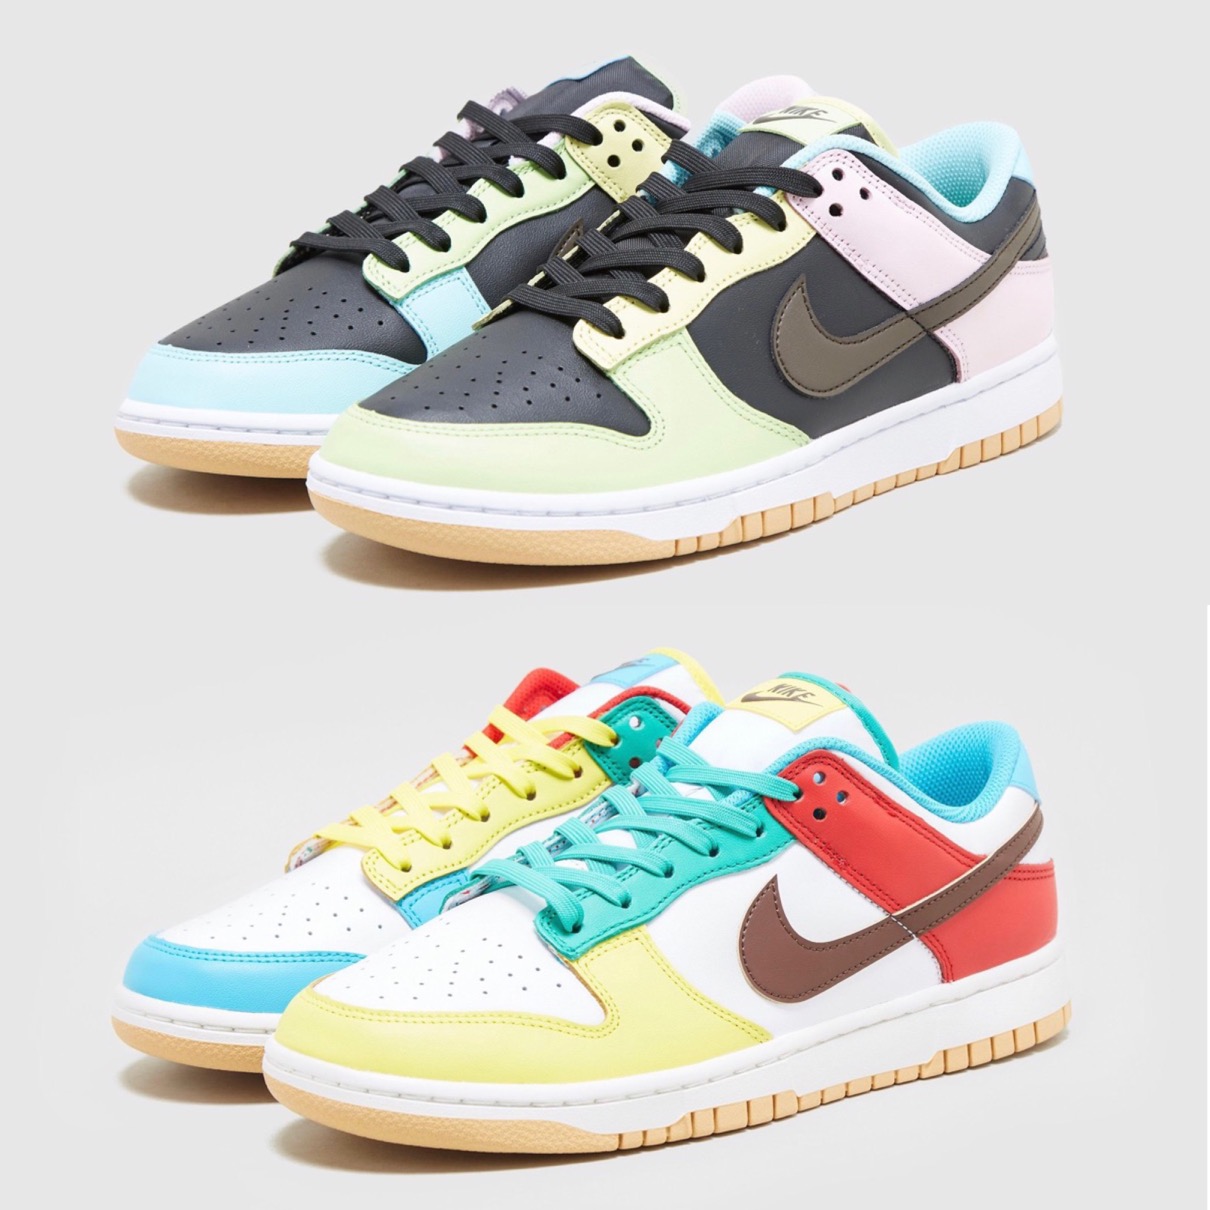 Nike】左右非対称なDunk Low SE “Free.99” Packが国内5月7日/5月26日に